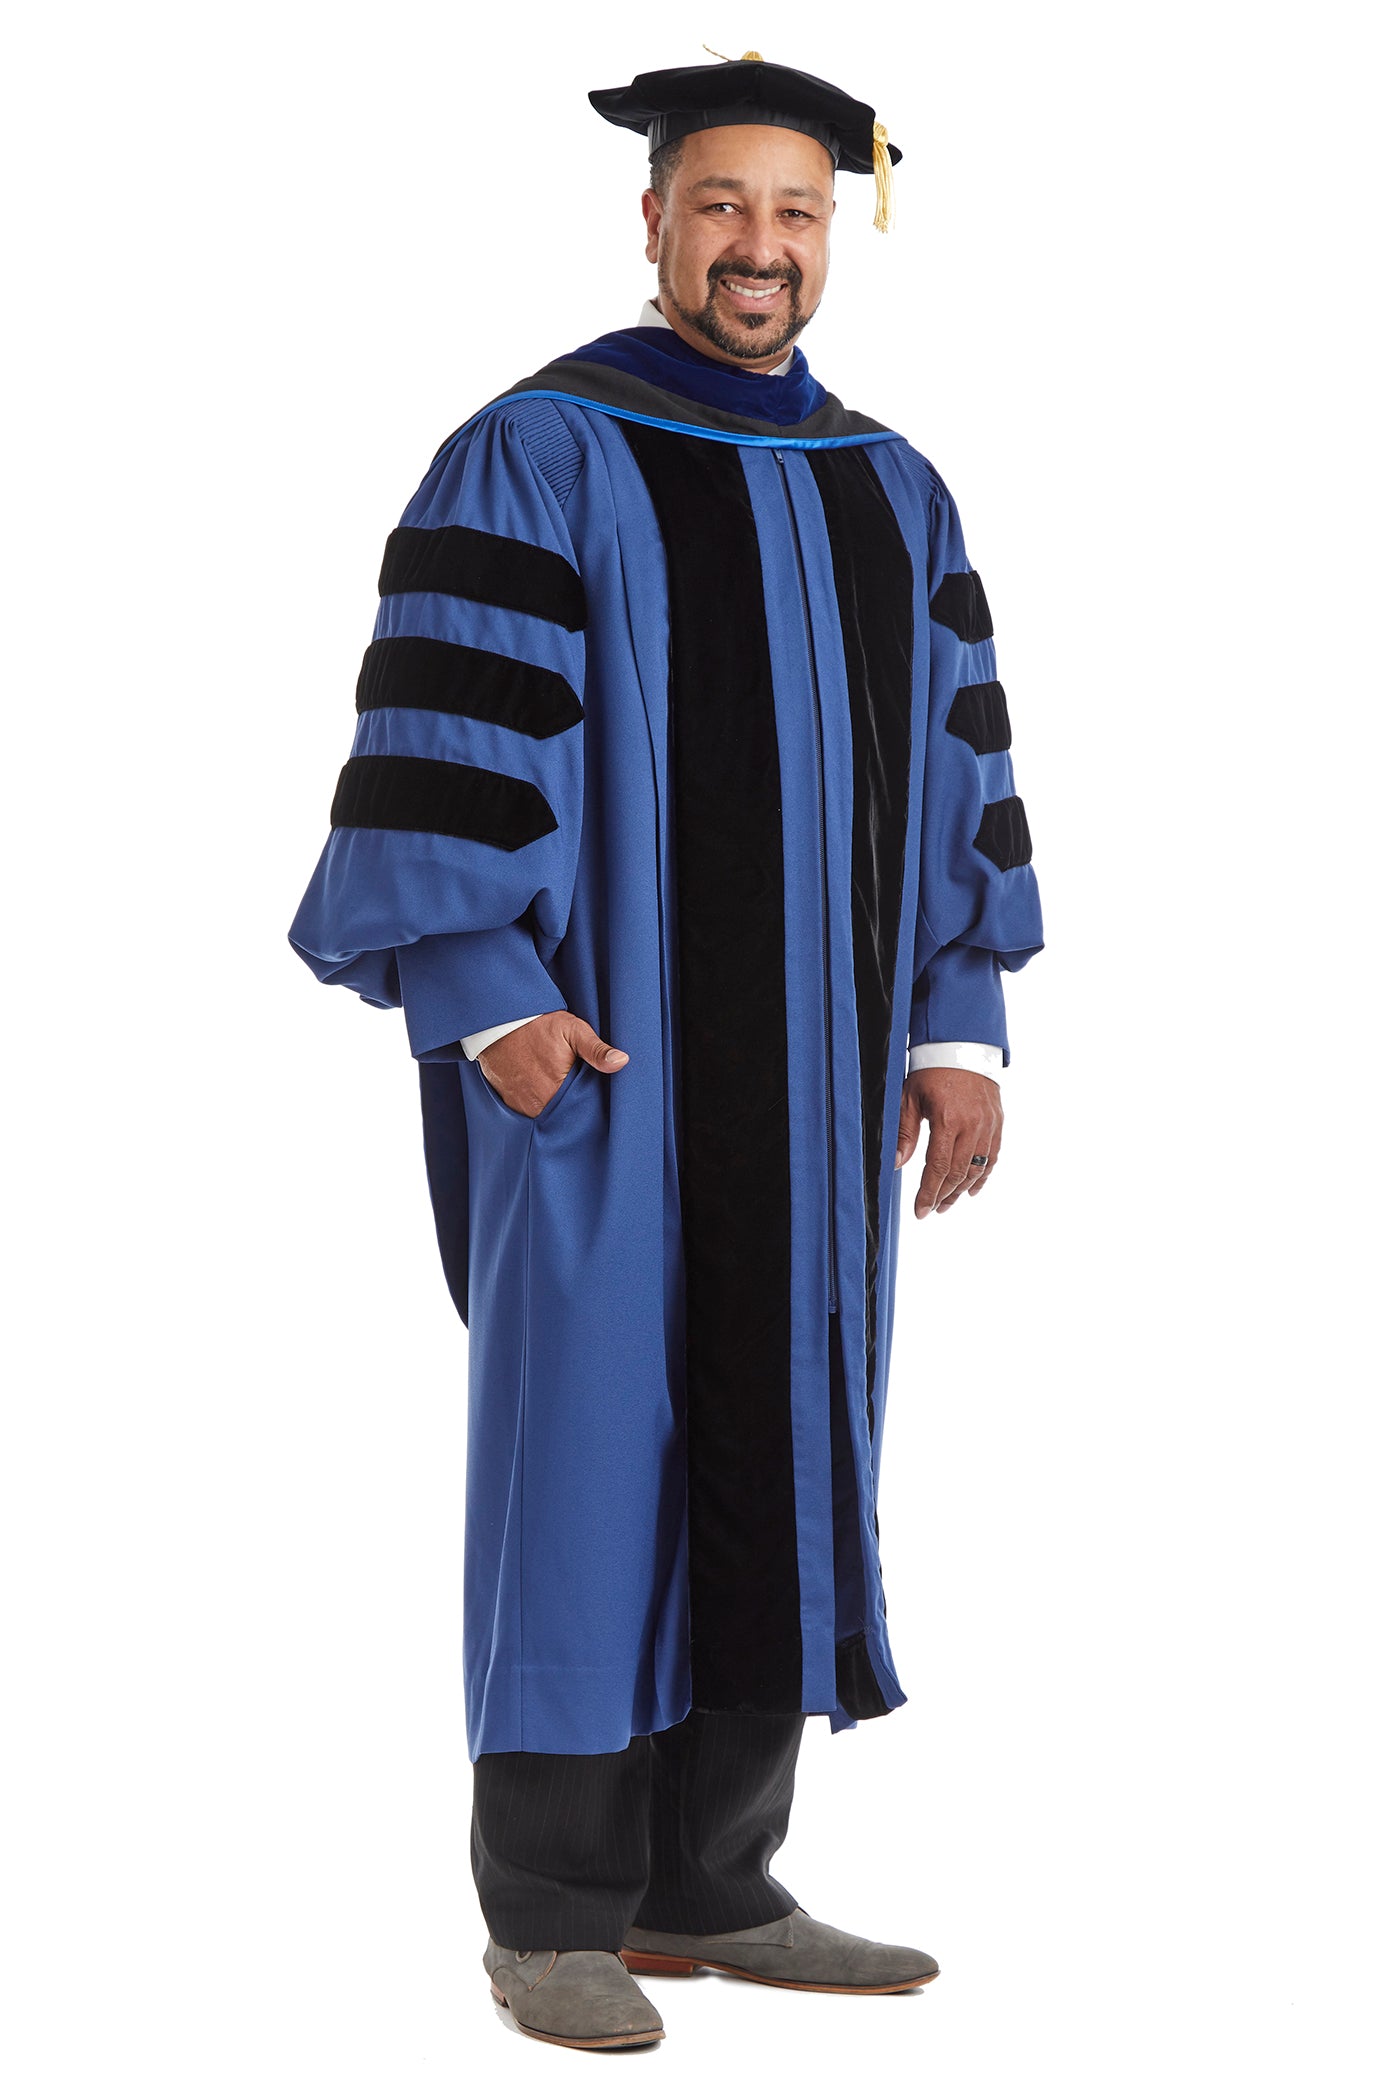 Yale University Doctoral Regalia Rental Set. Doctoral Gown, PhD Hood, and Eight Sided Doctoral Tam with Tassel